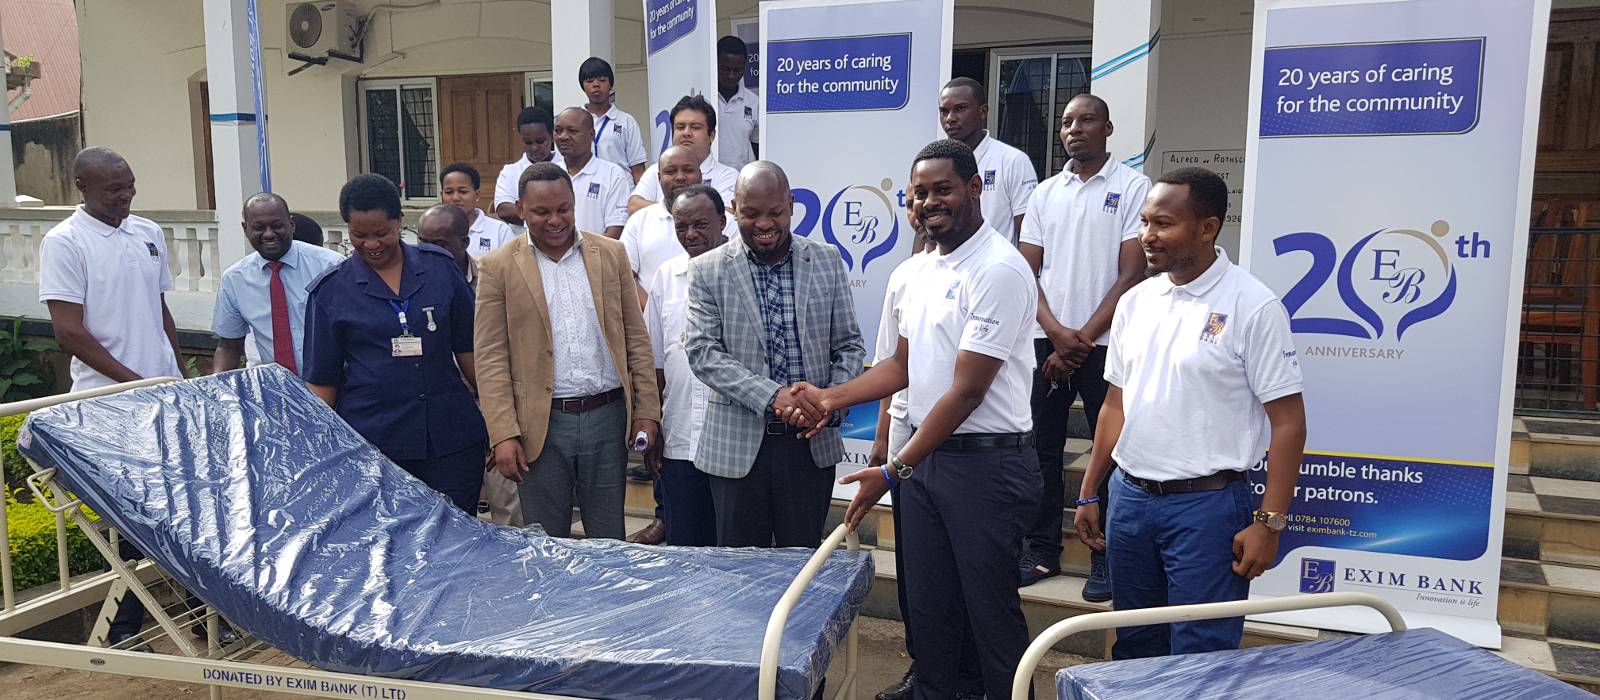 Exim Tanzania donating beds and mattresses to Mount Meru Regional Hospital in Arusha